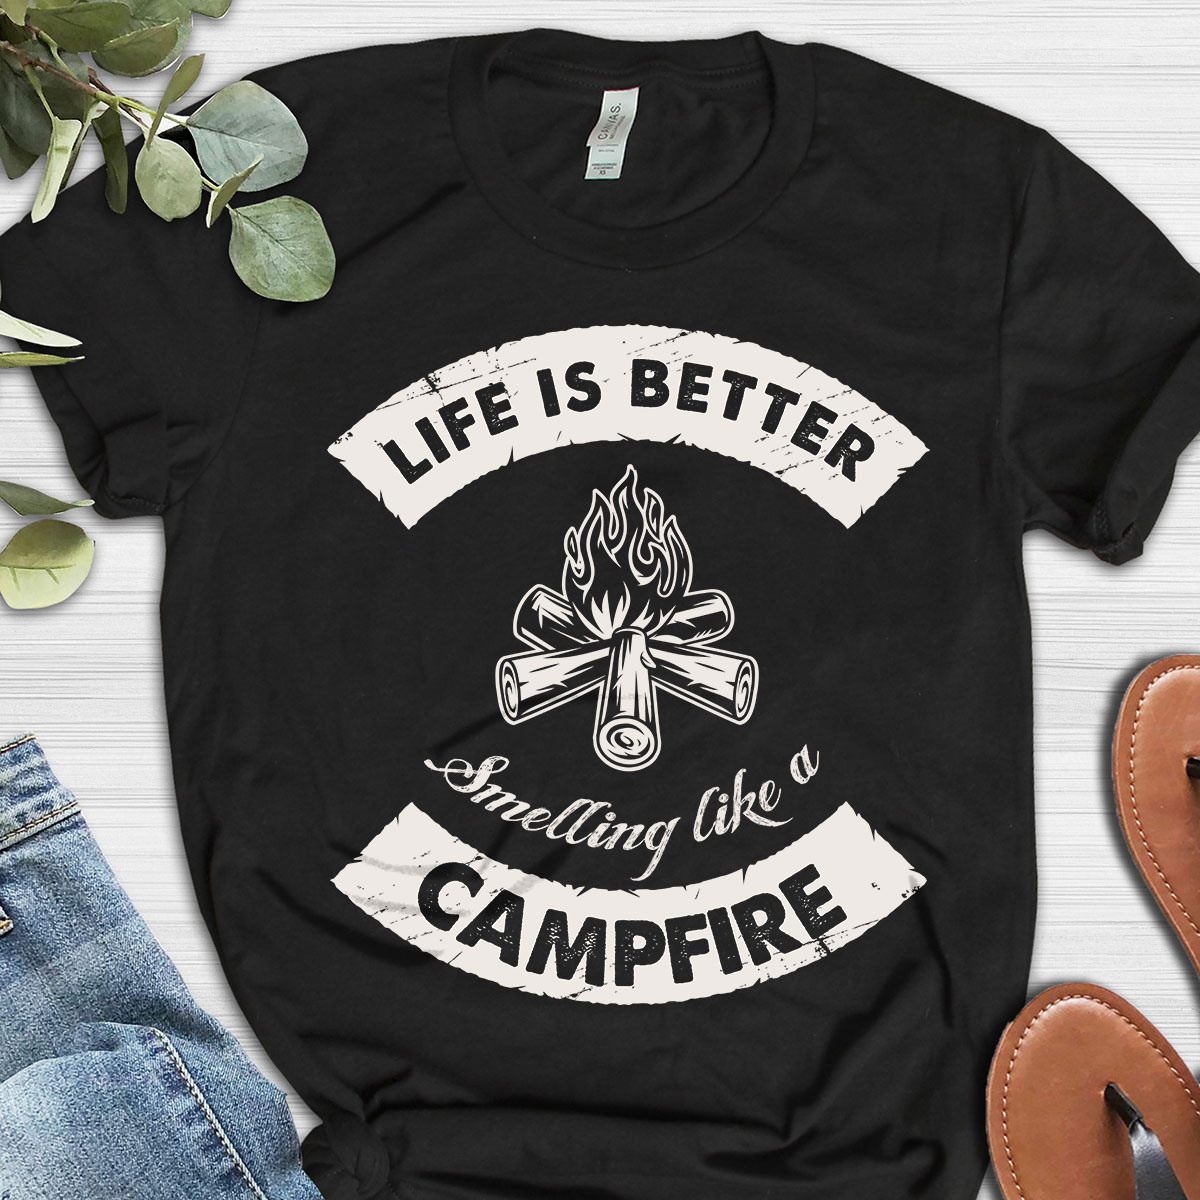 Life is better smeeling like a campfire